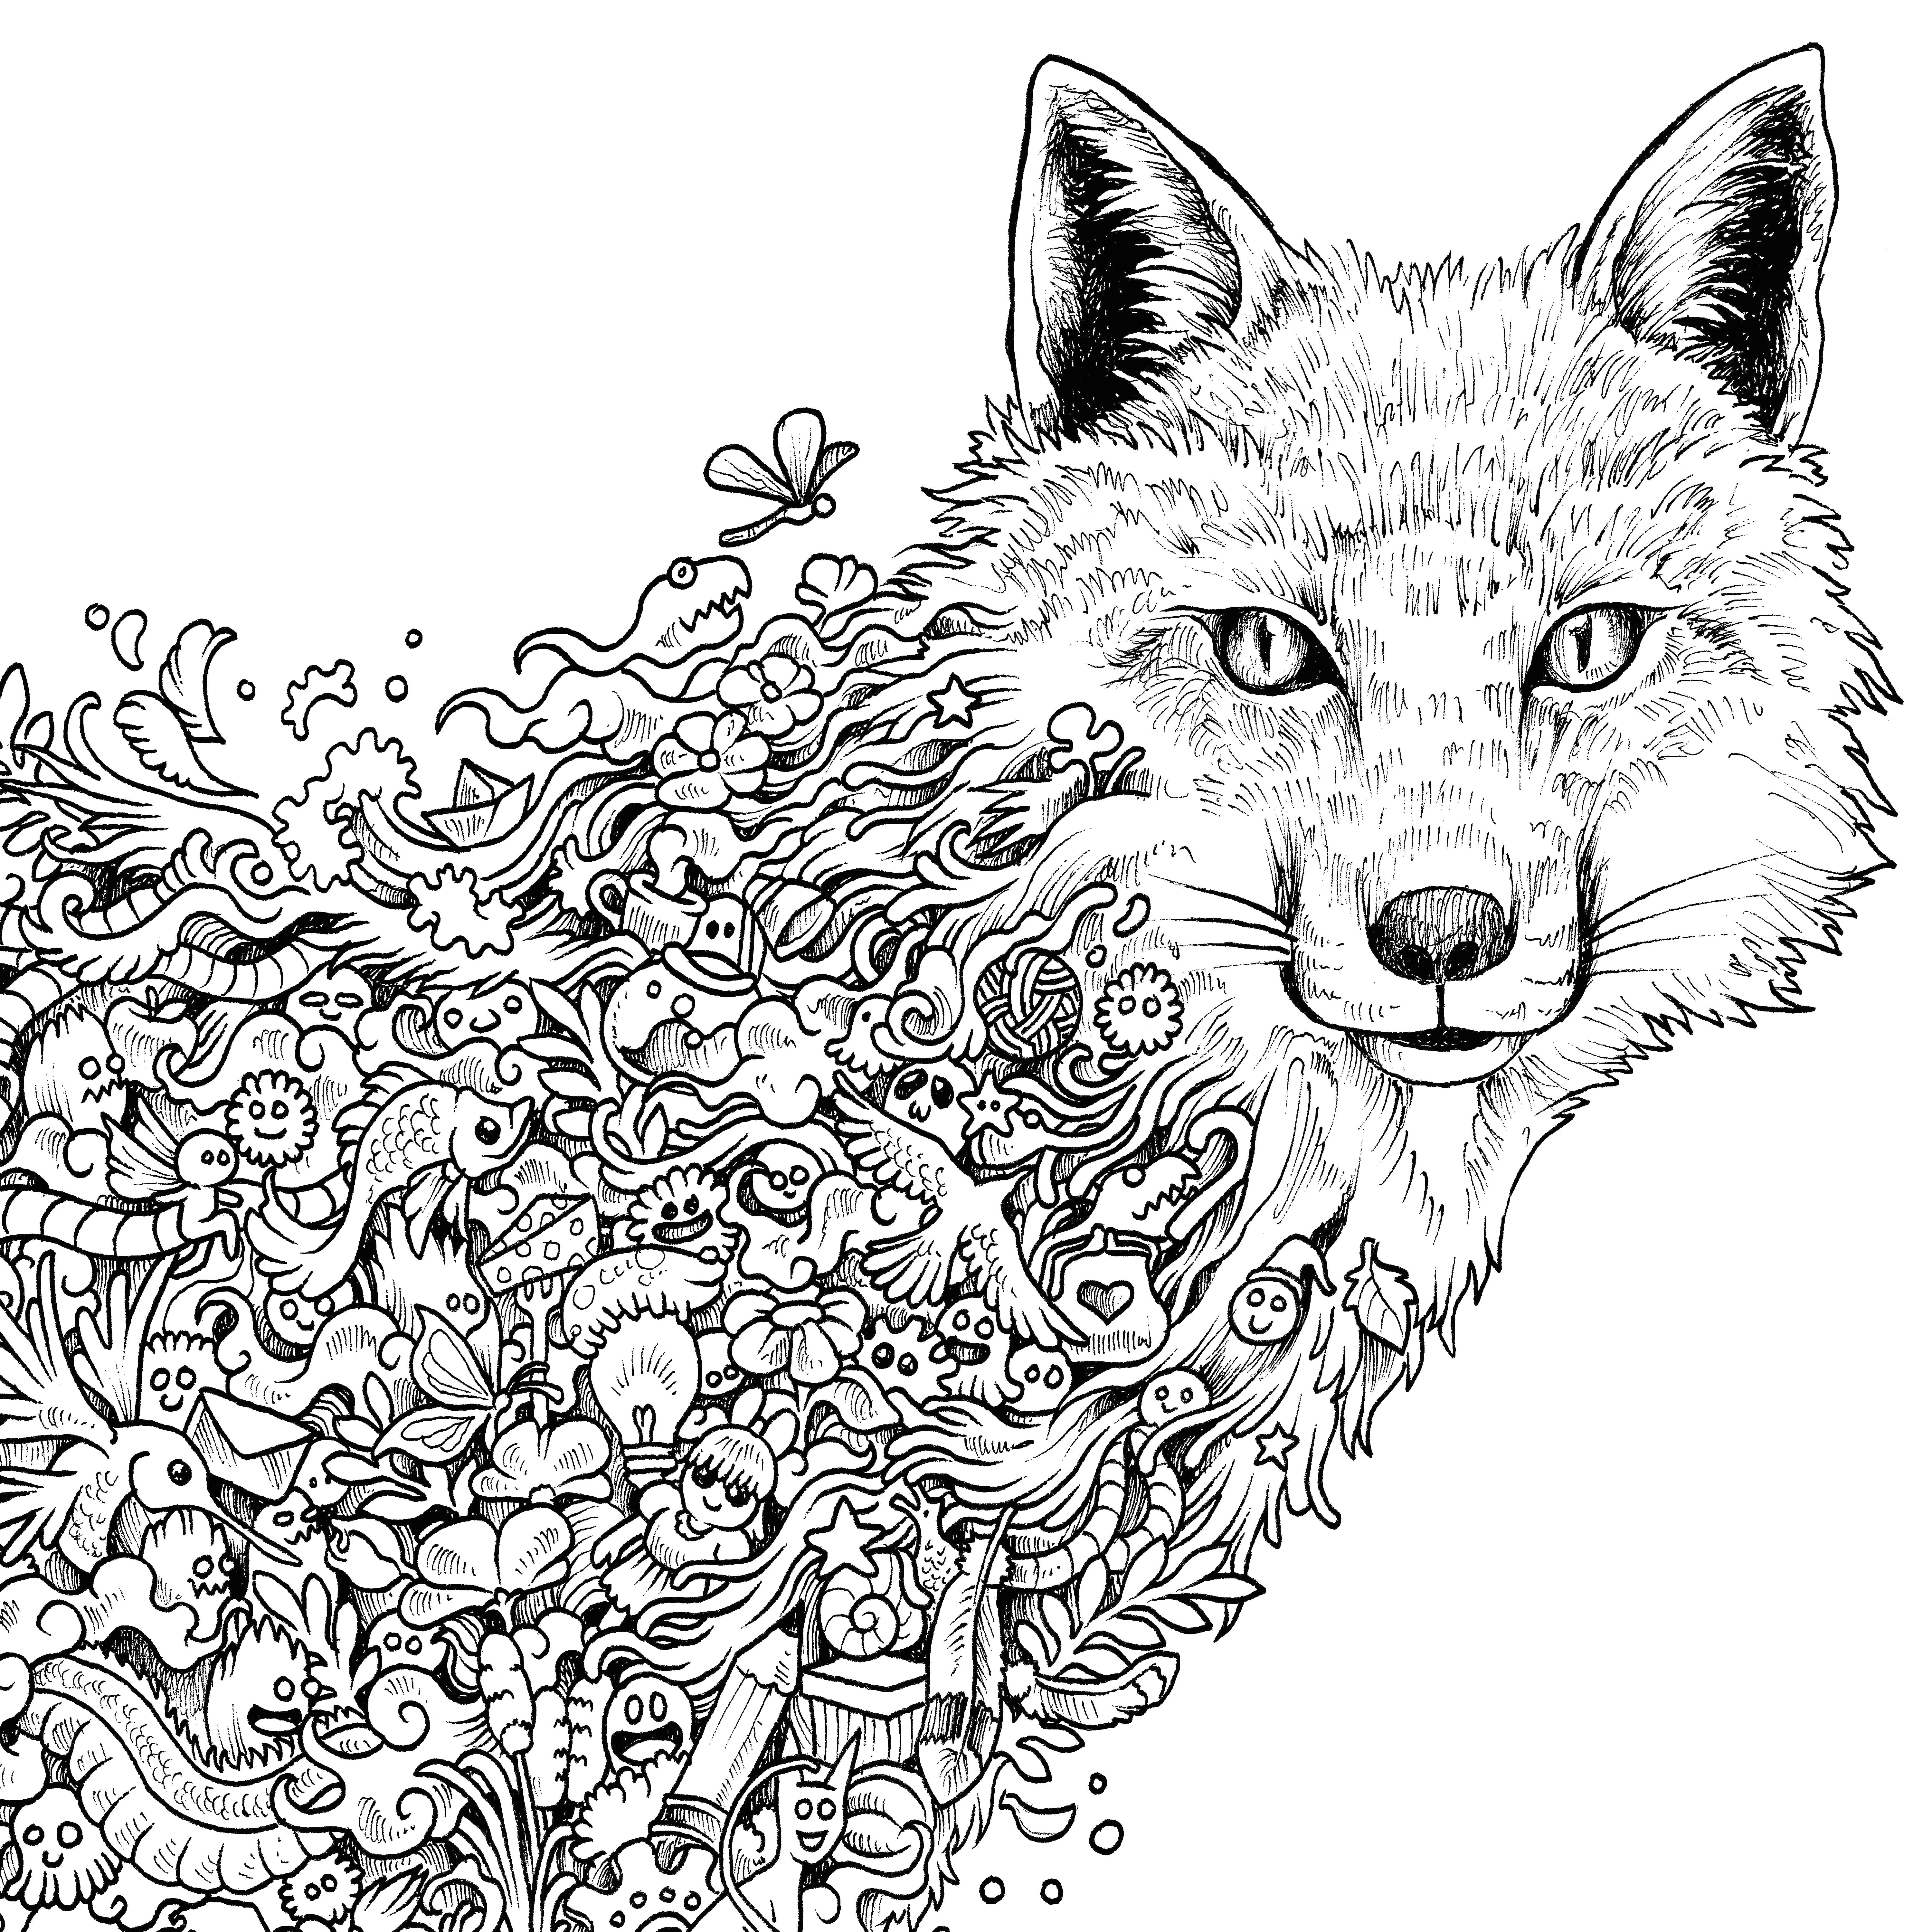 Wolf Drawing to Color Online Coloring for Adults Alcater Coloring Page